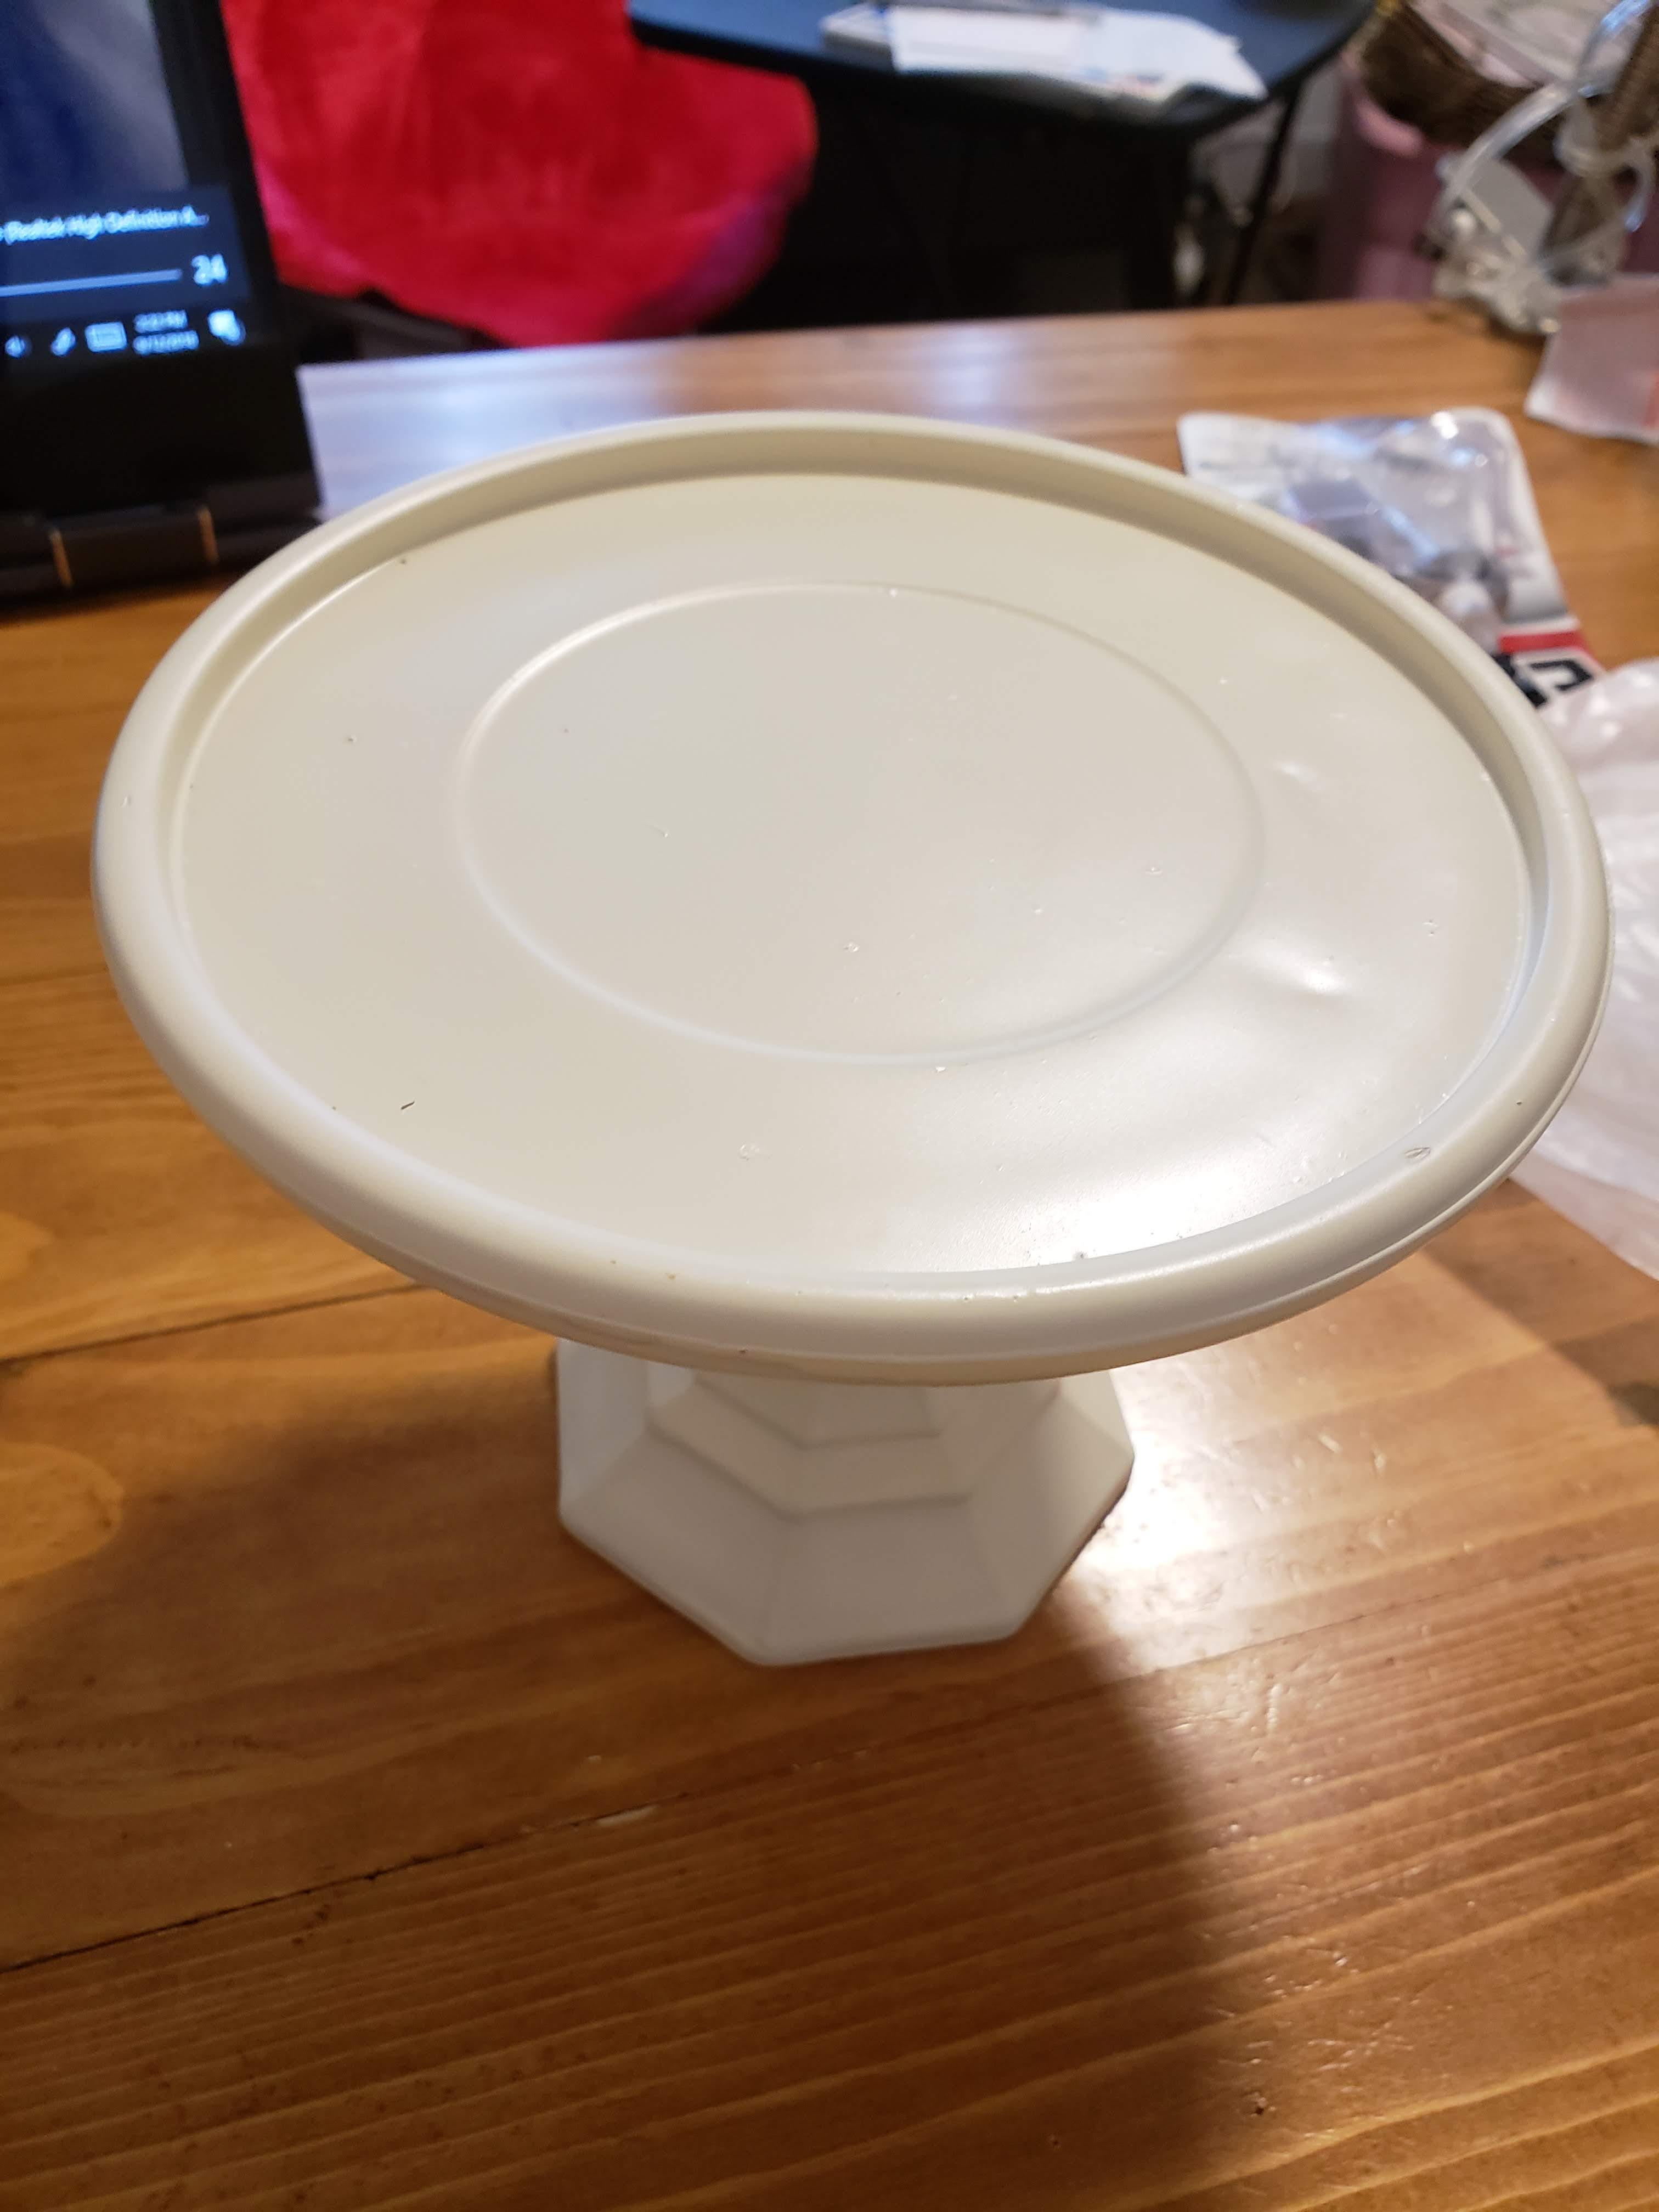 Glue dish to top of candle holder